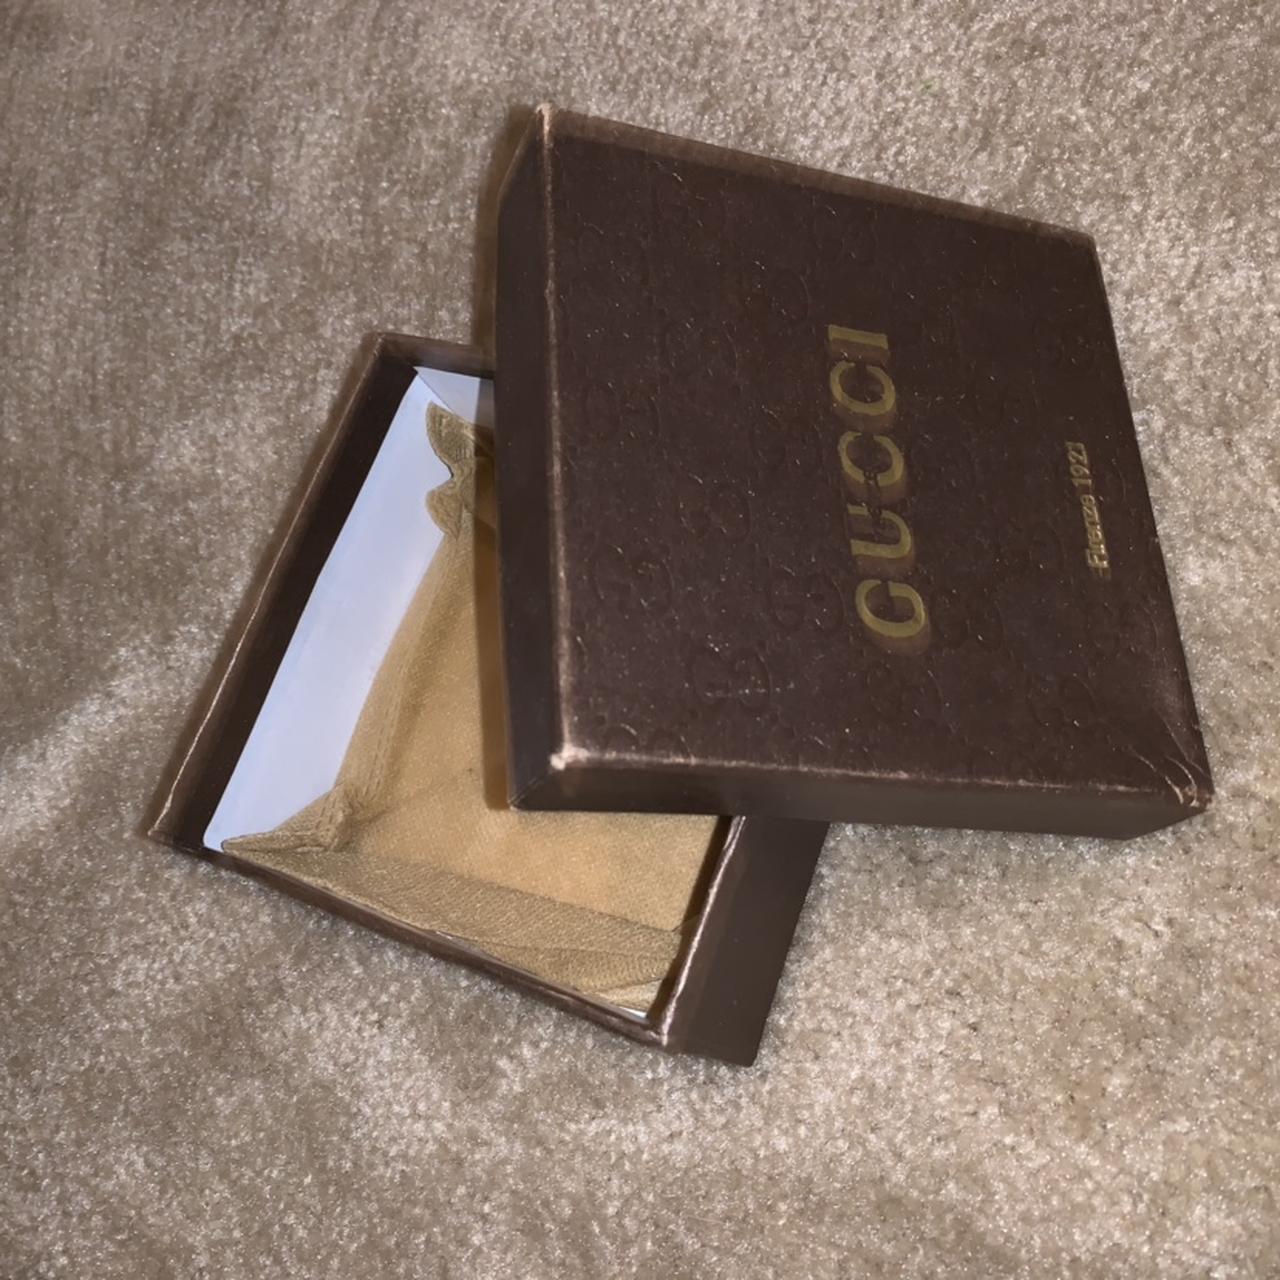 AUTHENTIC Gucci belt box, BOX ONLY actually might... - Depop